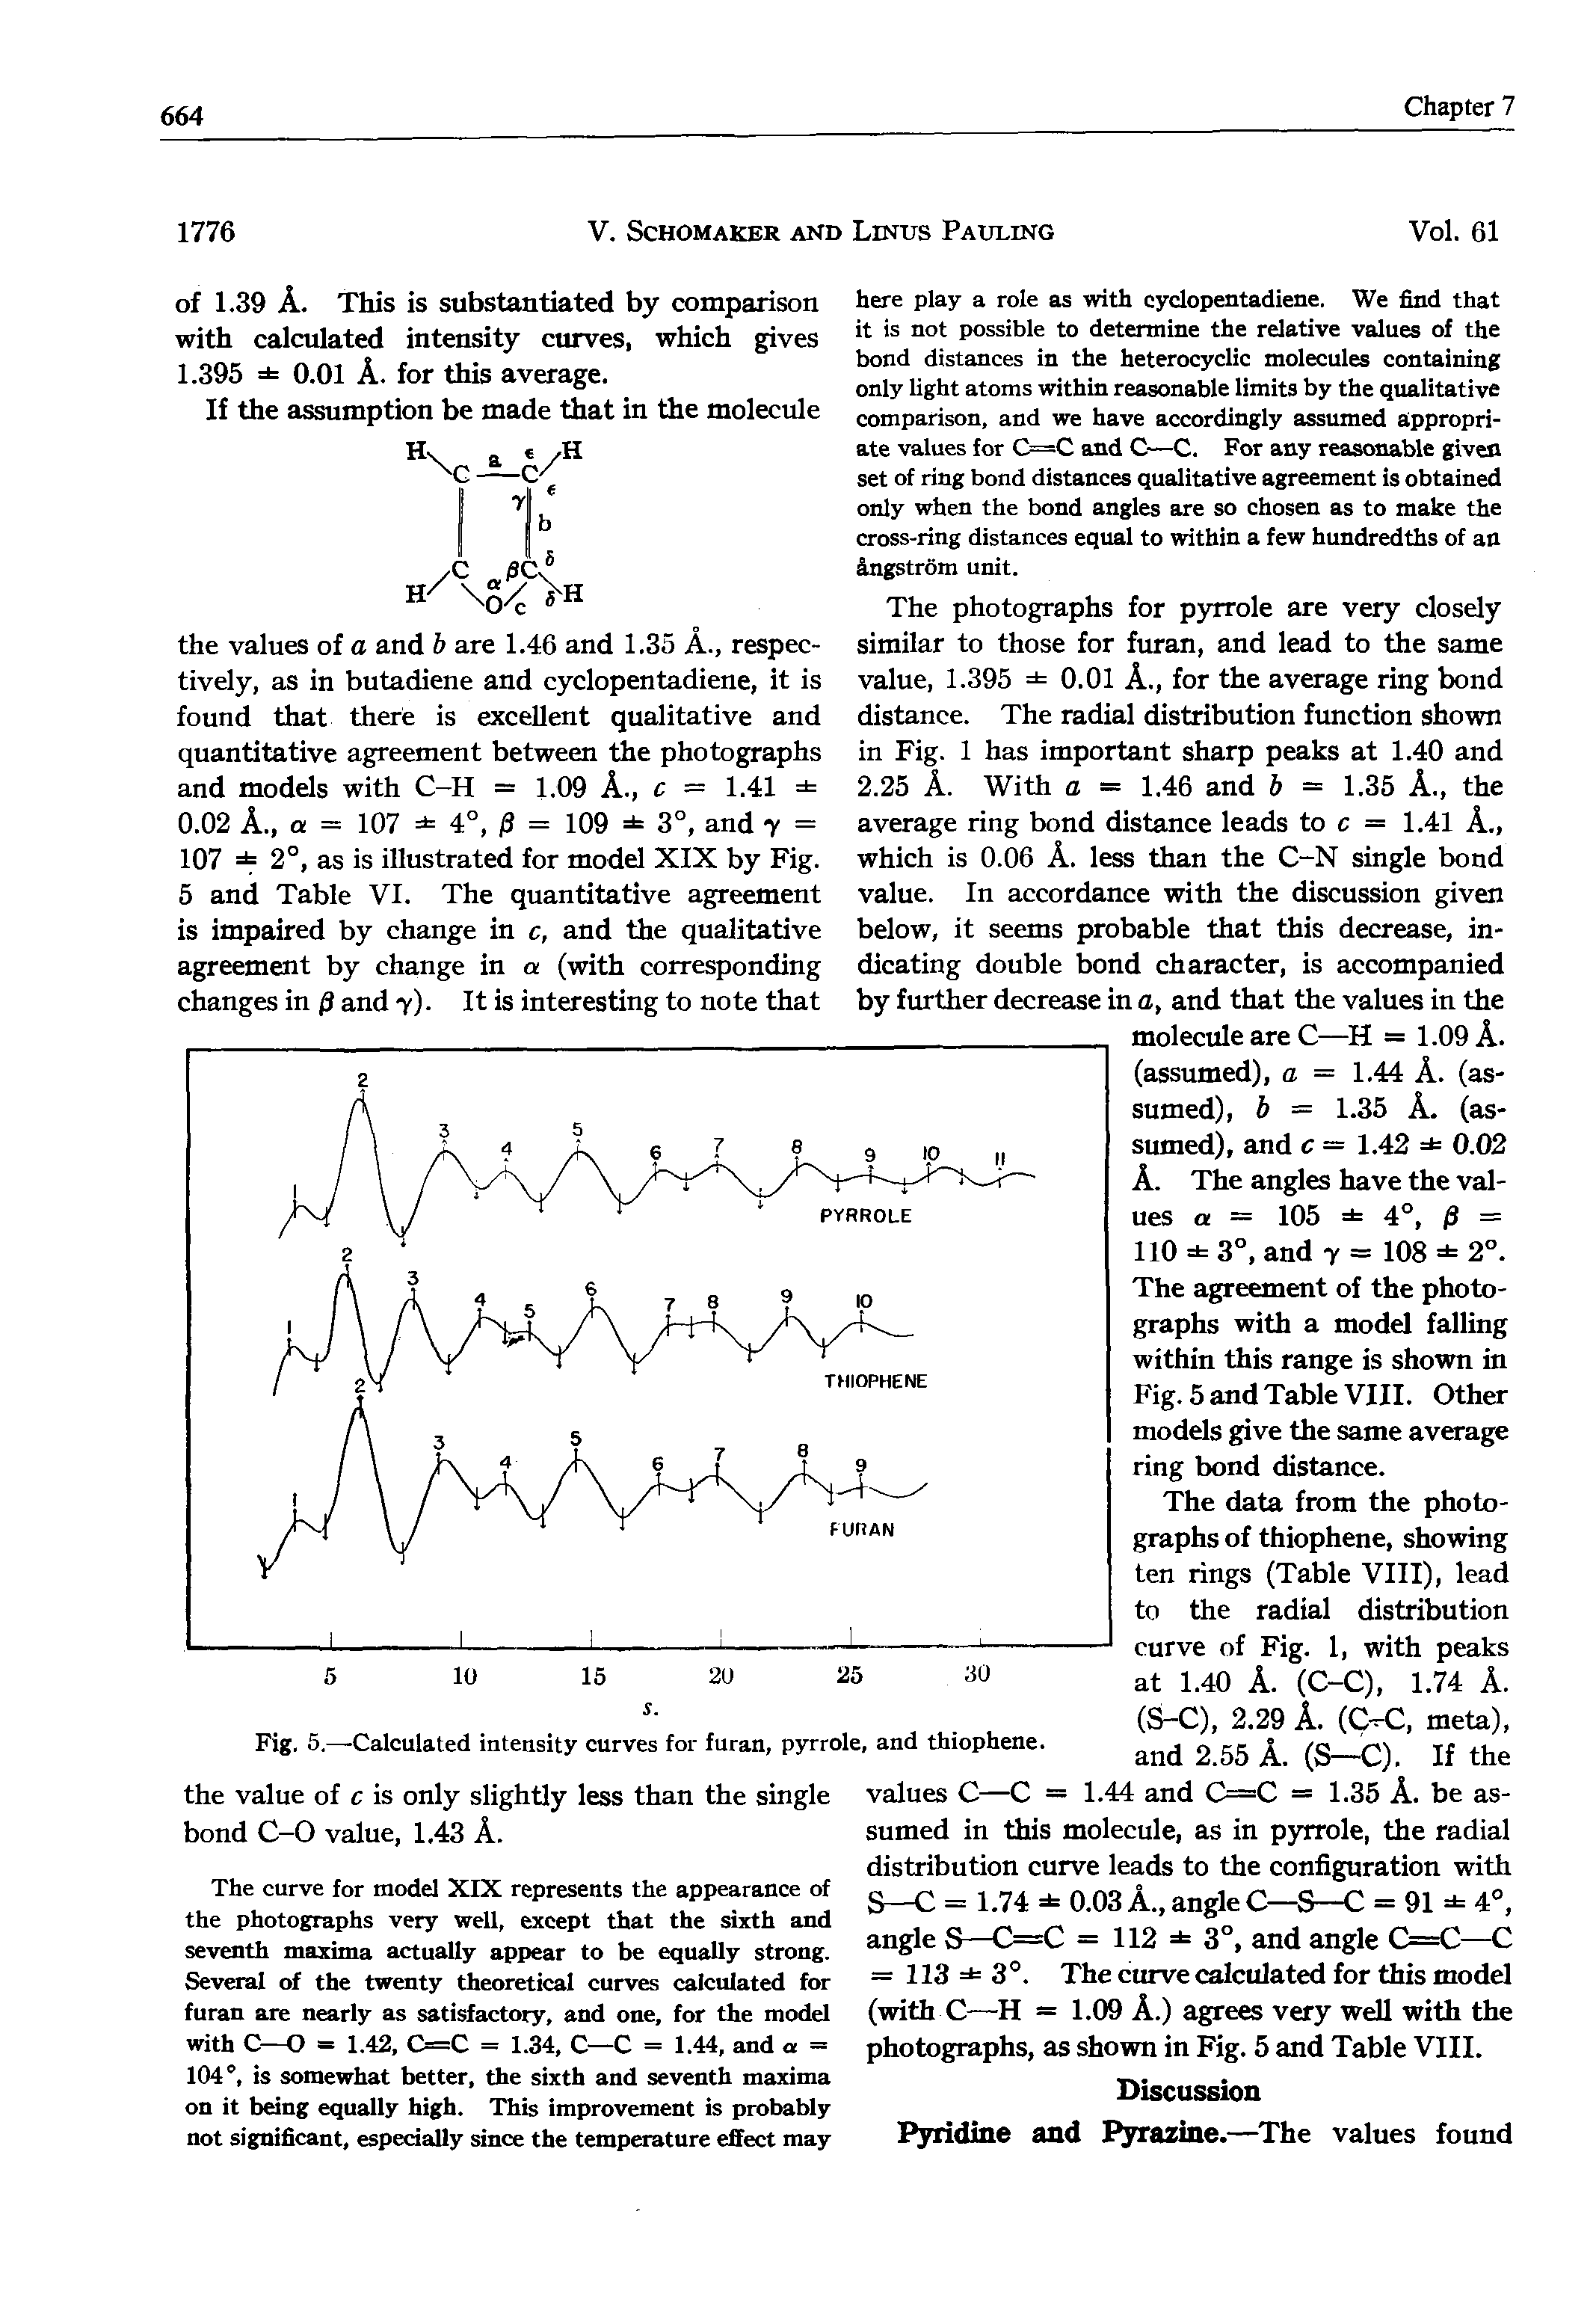 Fig. 5.—-Calculated intensity curves for furan, pyrrole, and thiophene.